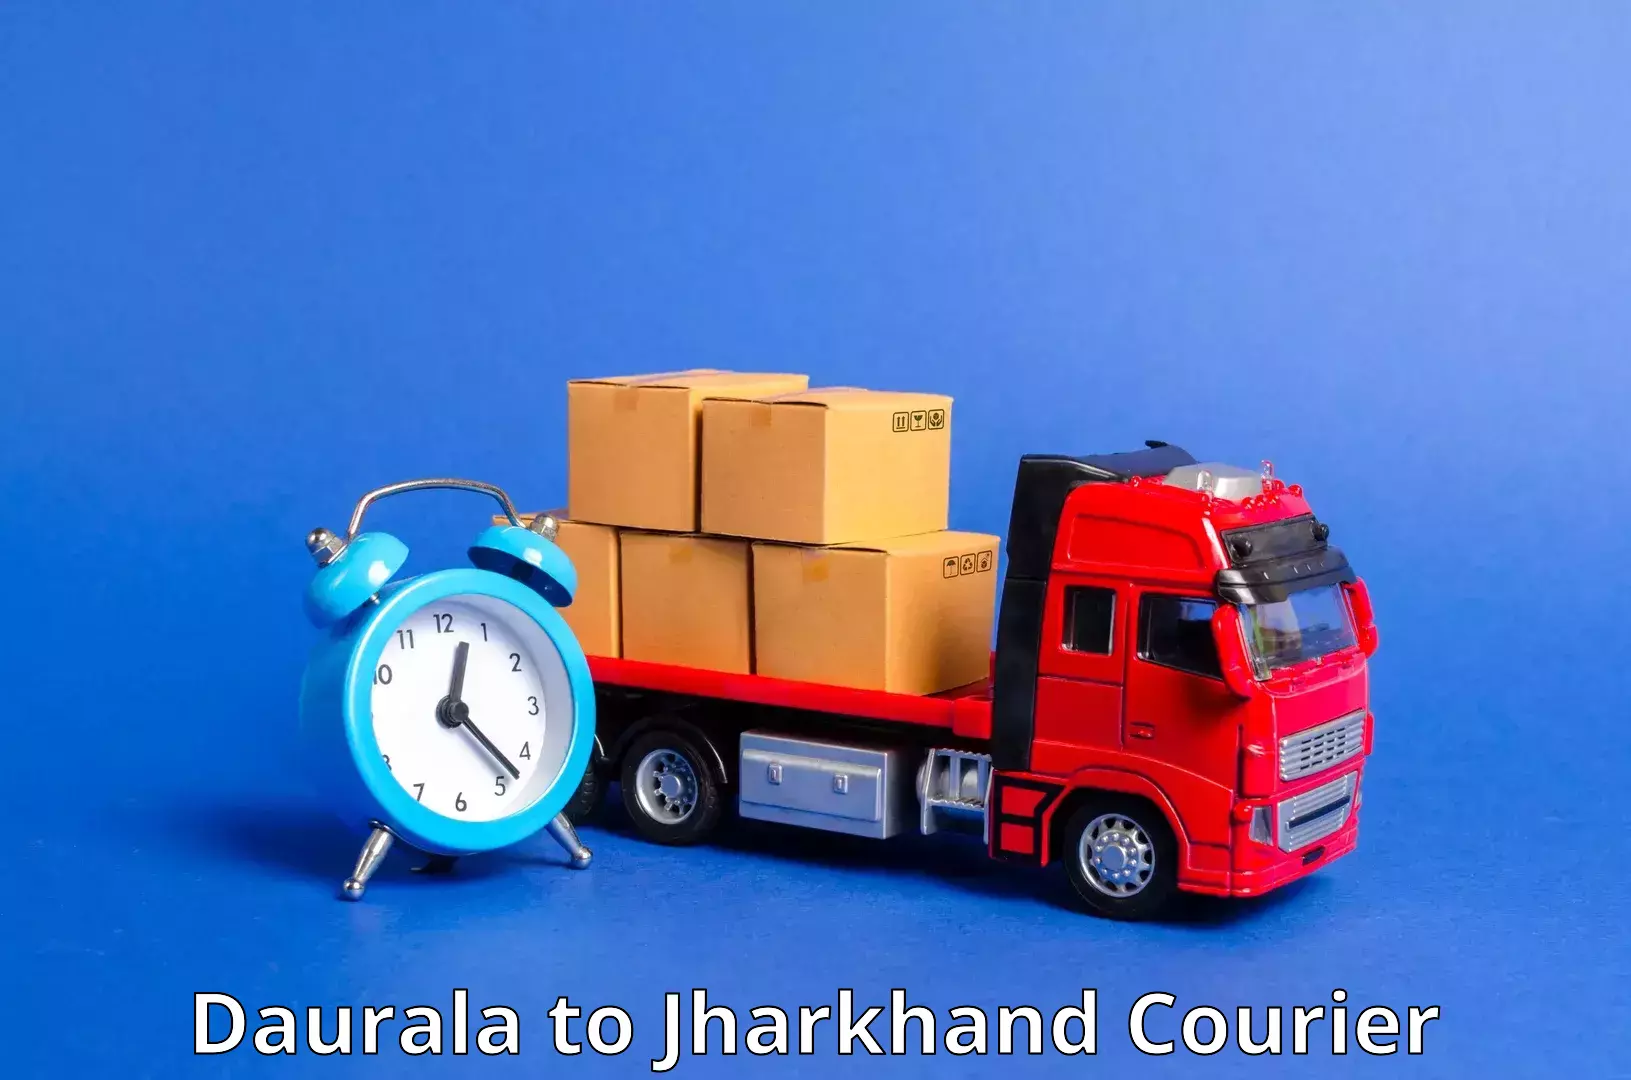 Quality courier services Daurala to Bokaro Steel City